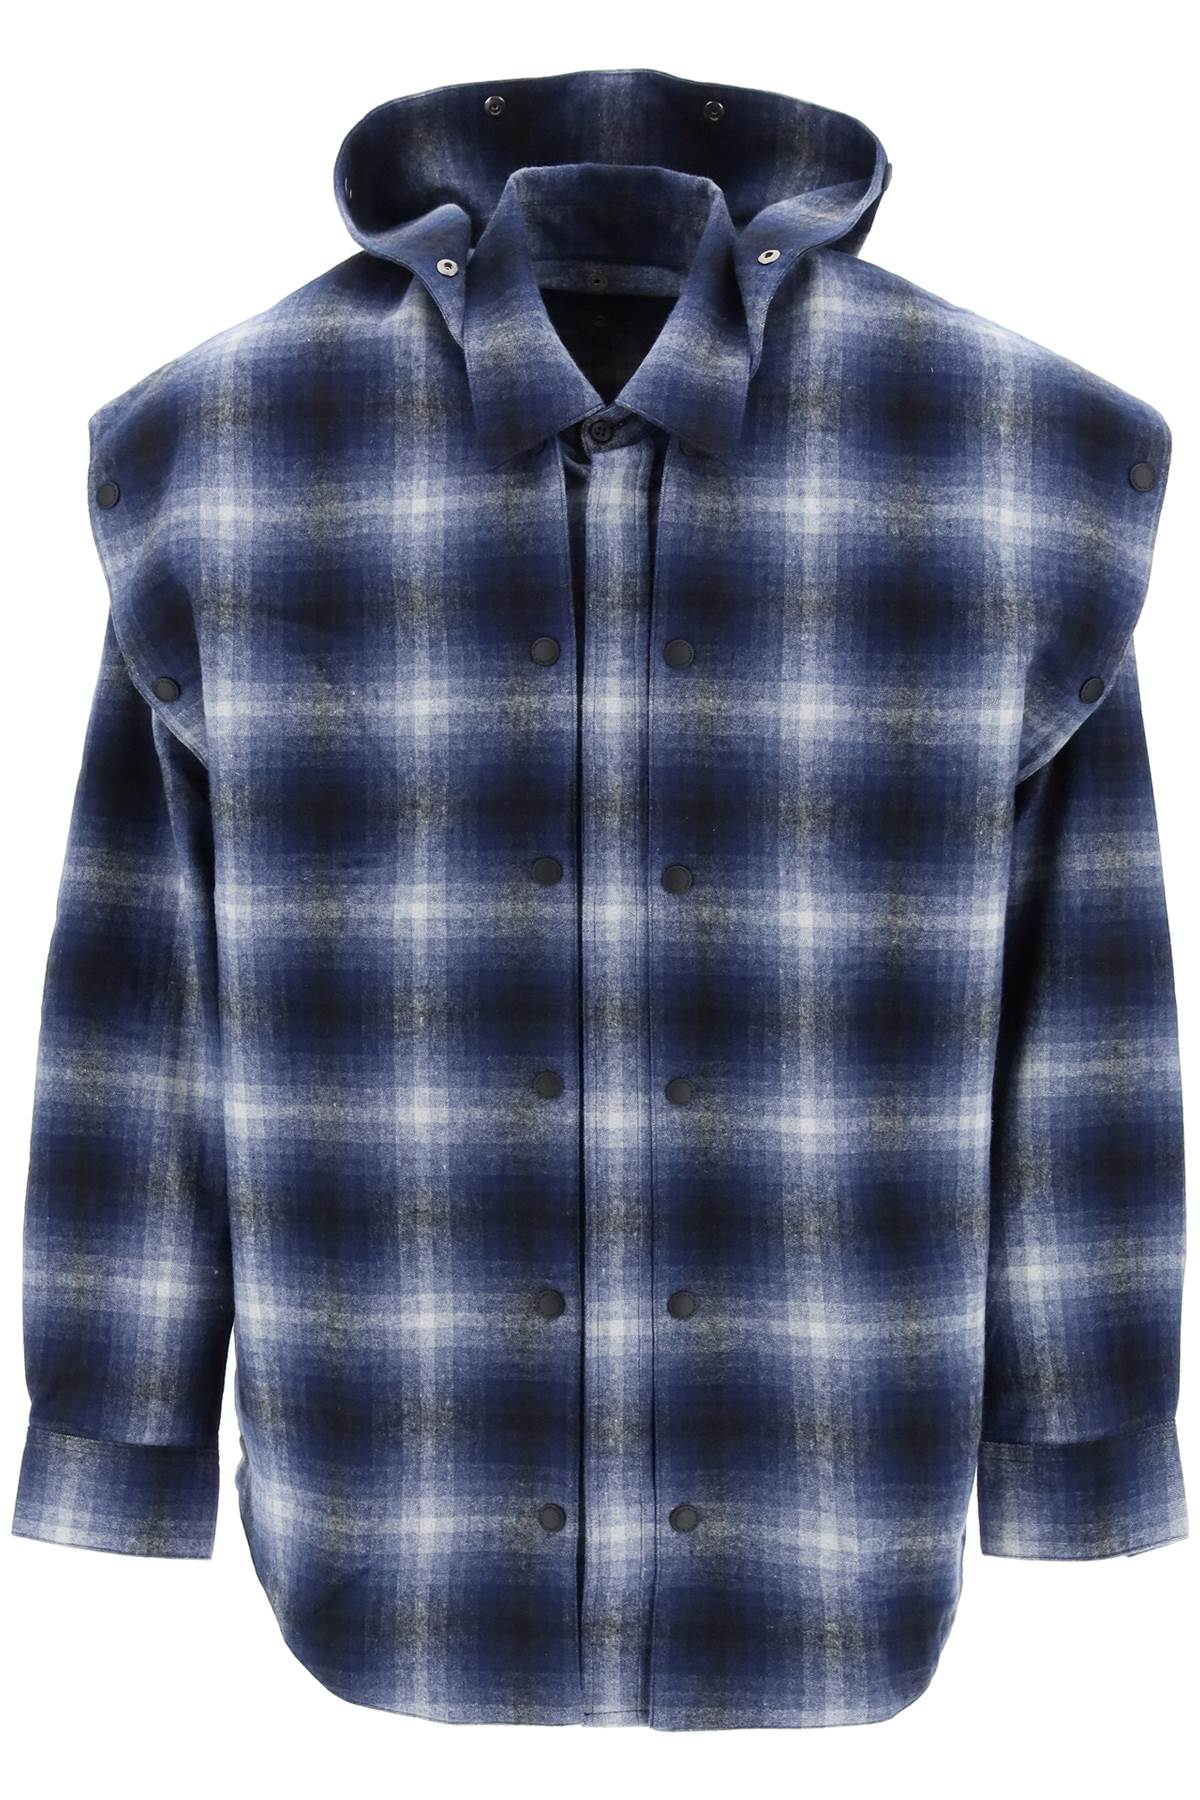 Y/PROJECT Modern Flannel Checker Over Shirt